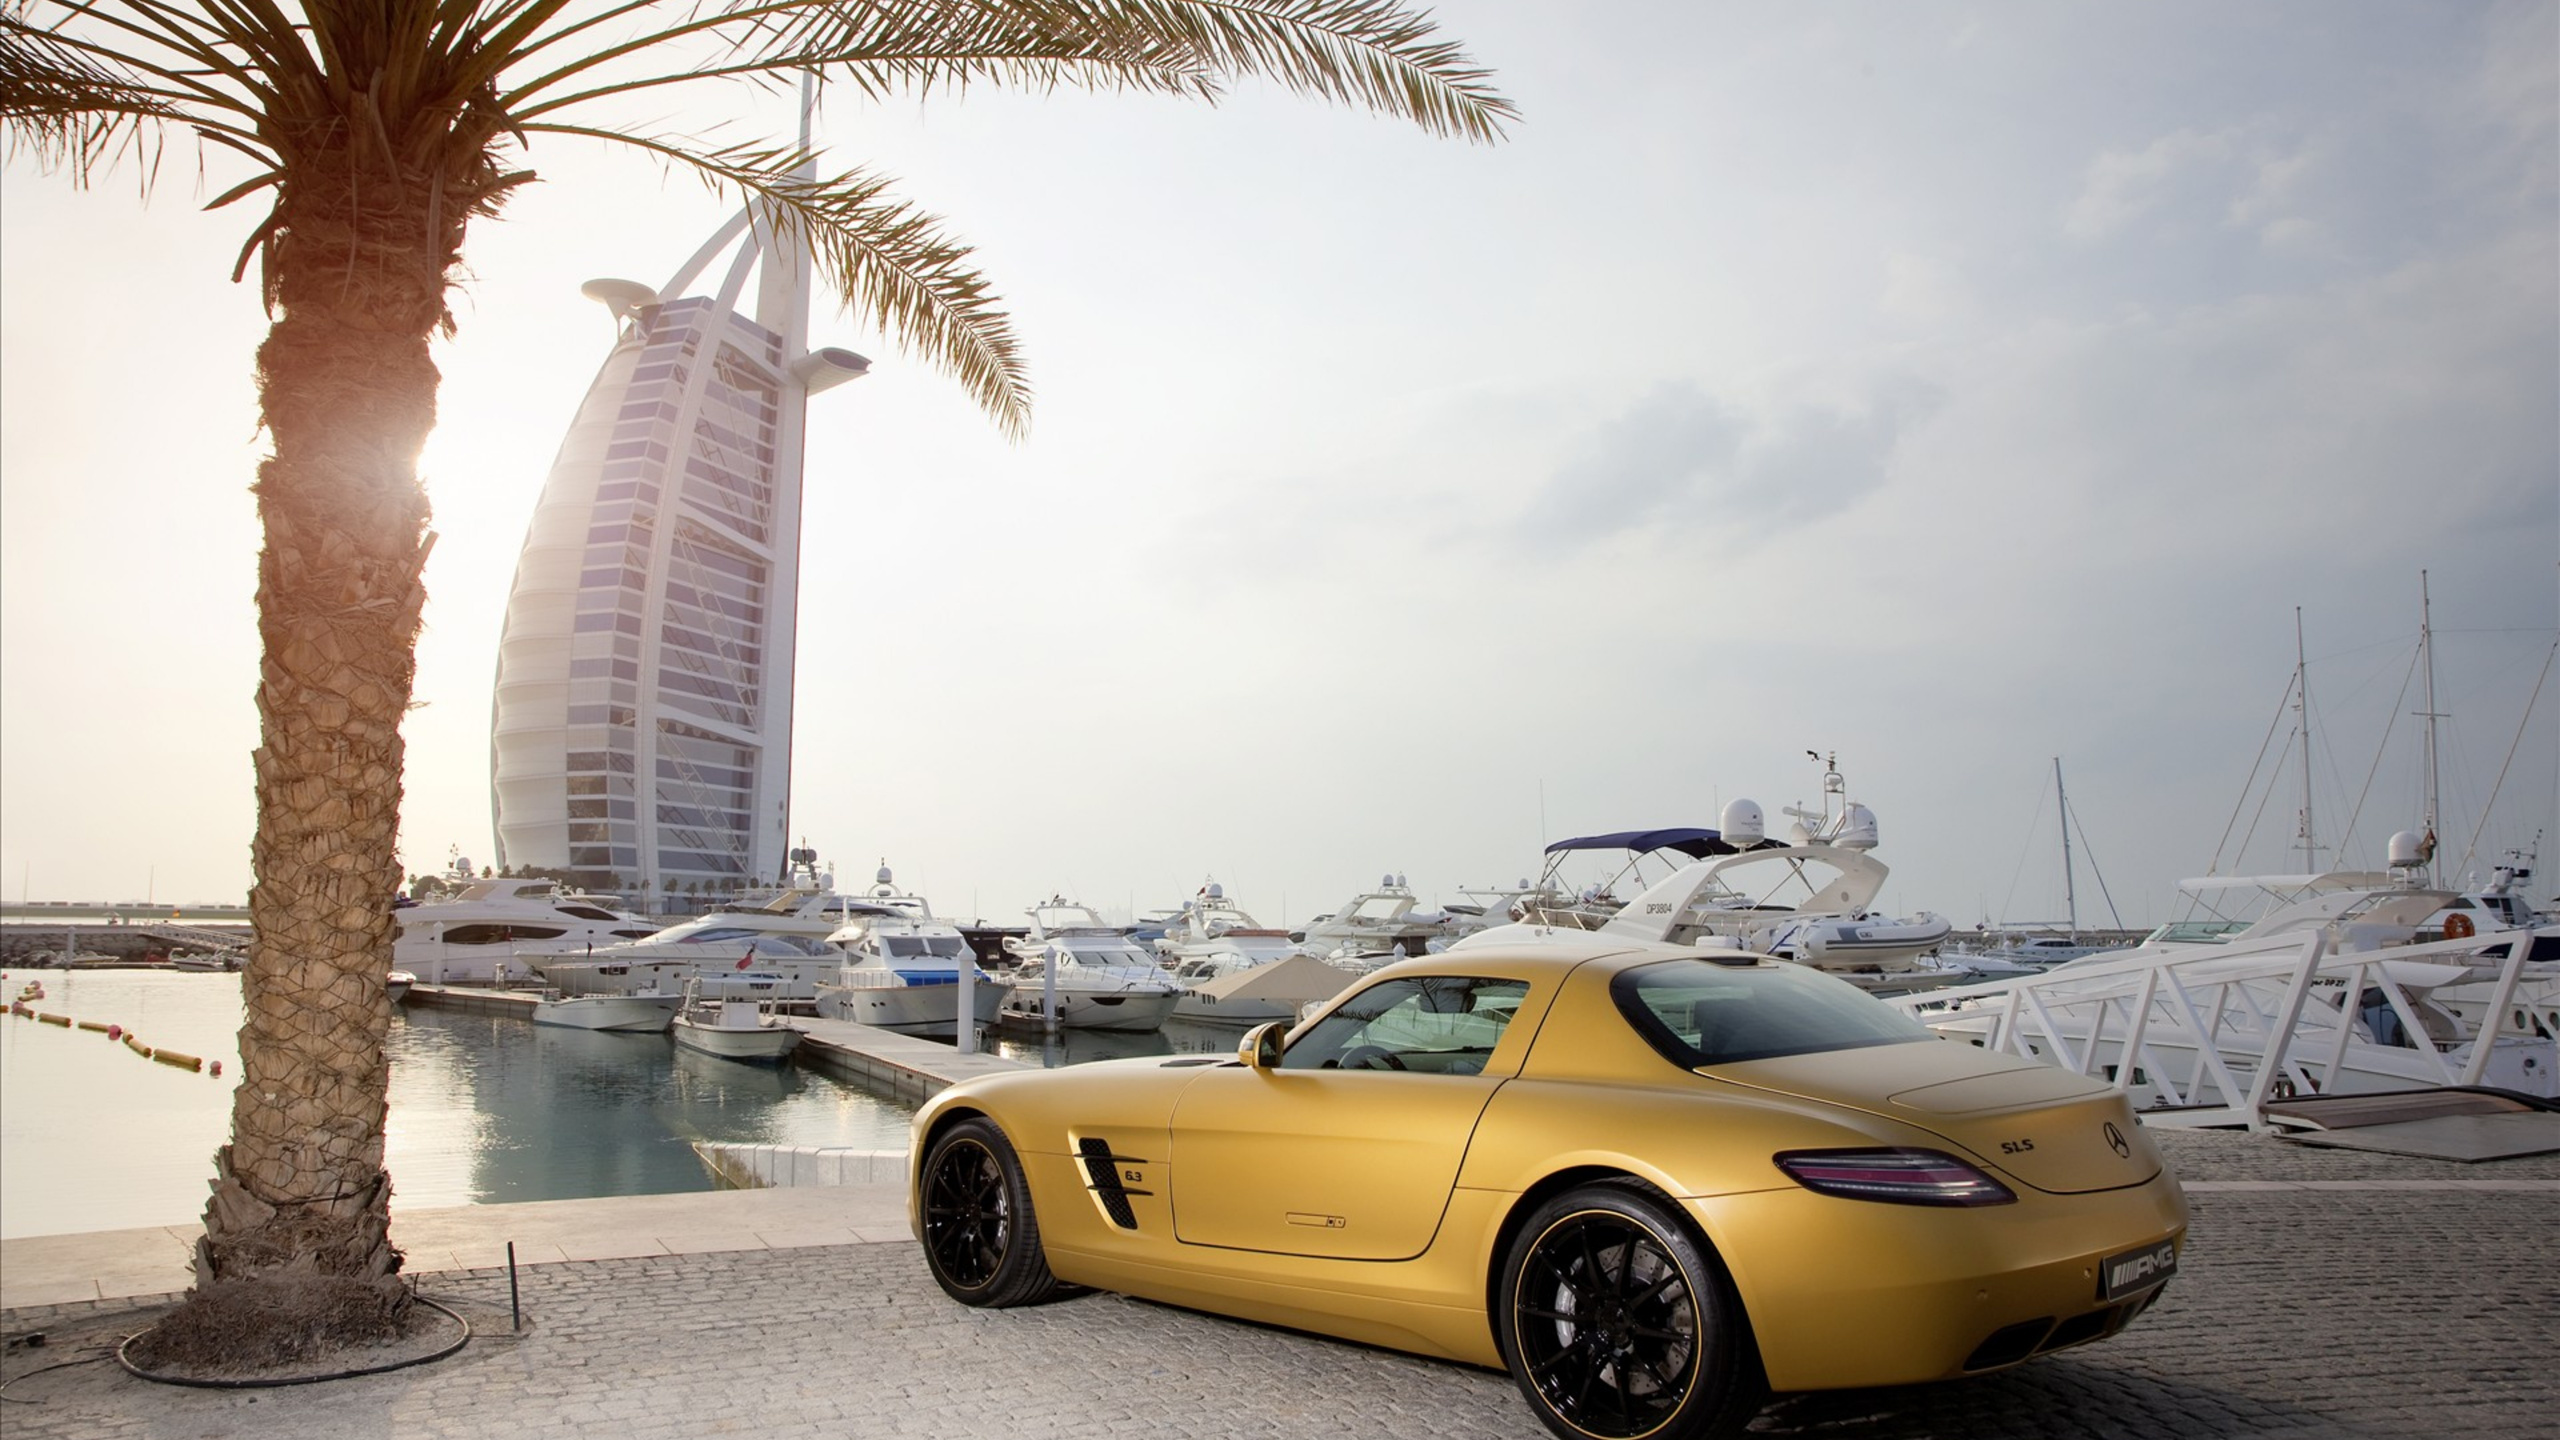 Yellow Porsche 911 Parked Near Palm Trees and Buildings During Daytime. Wallpaper in 2560x1440 Resolution